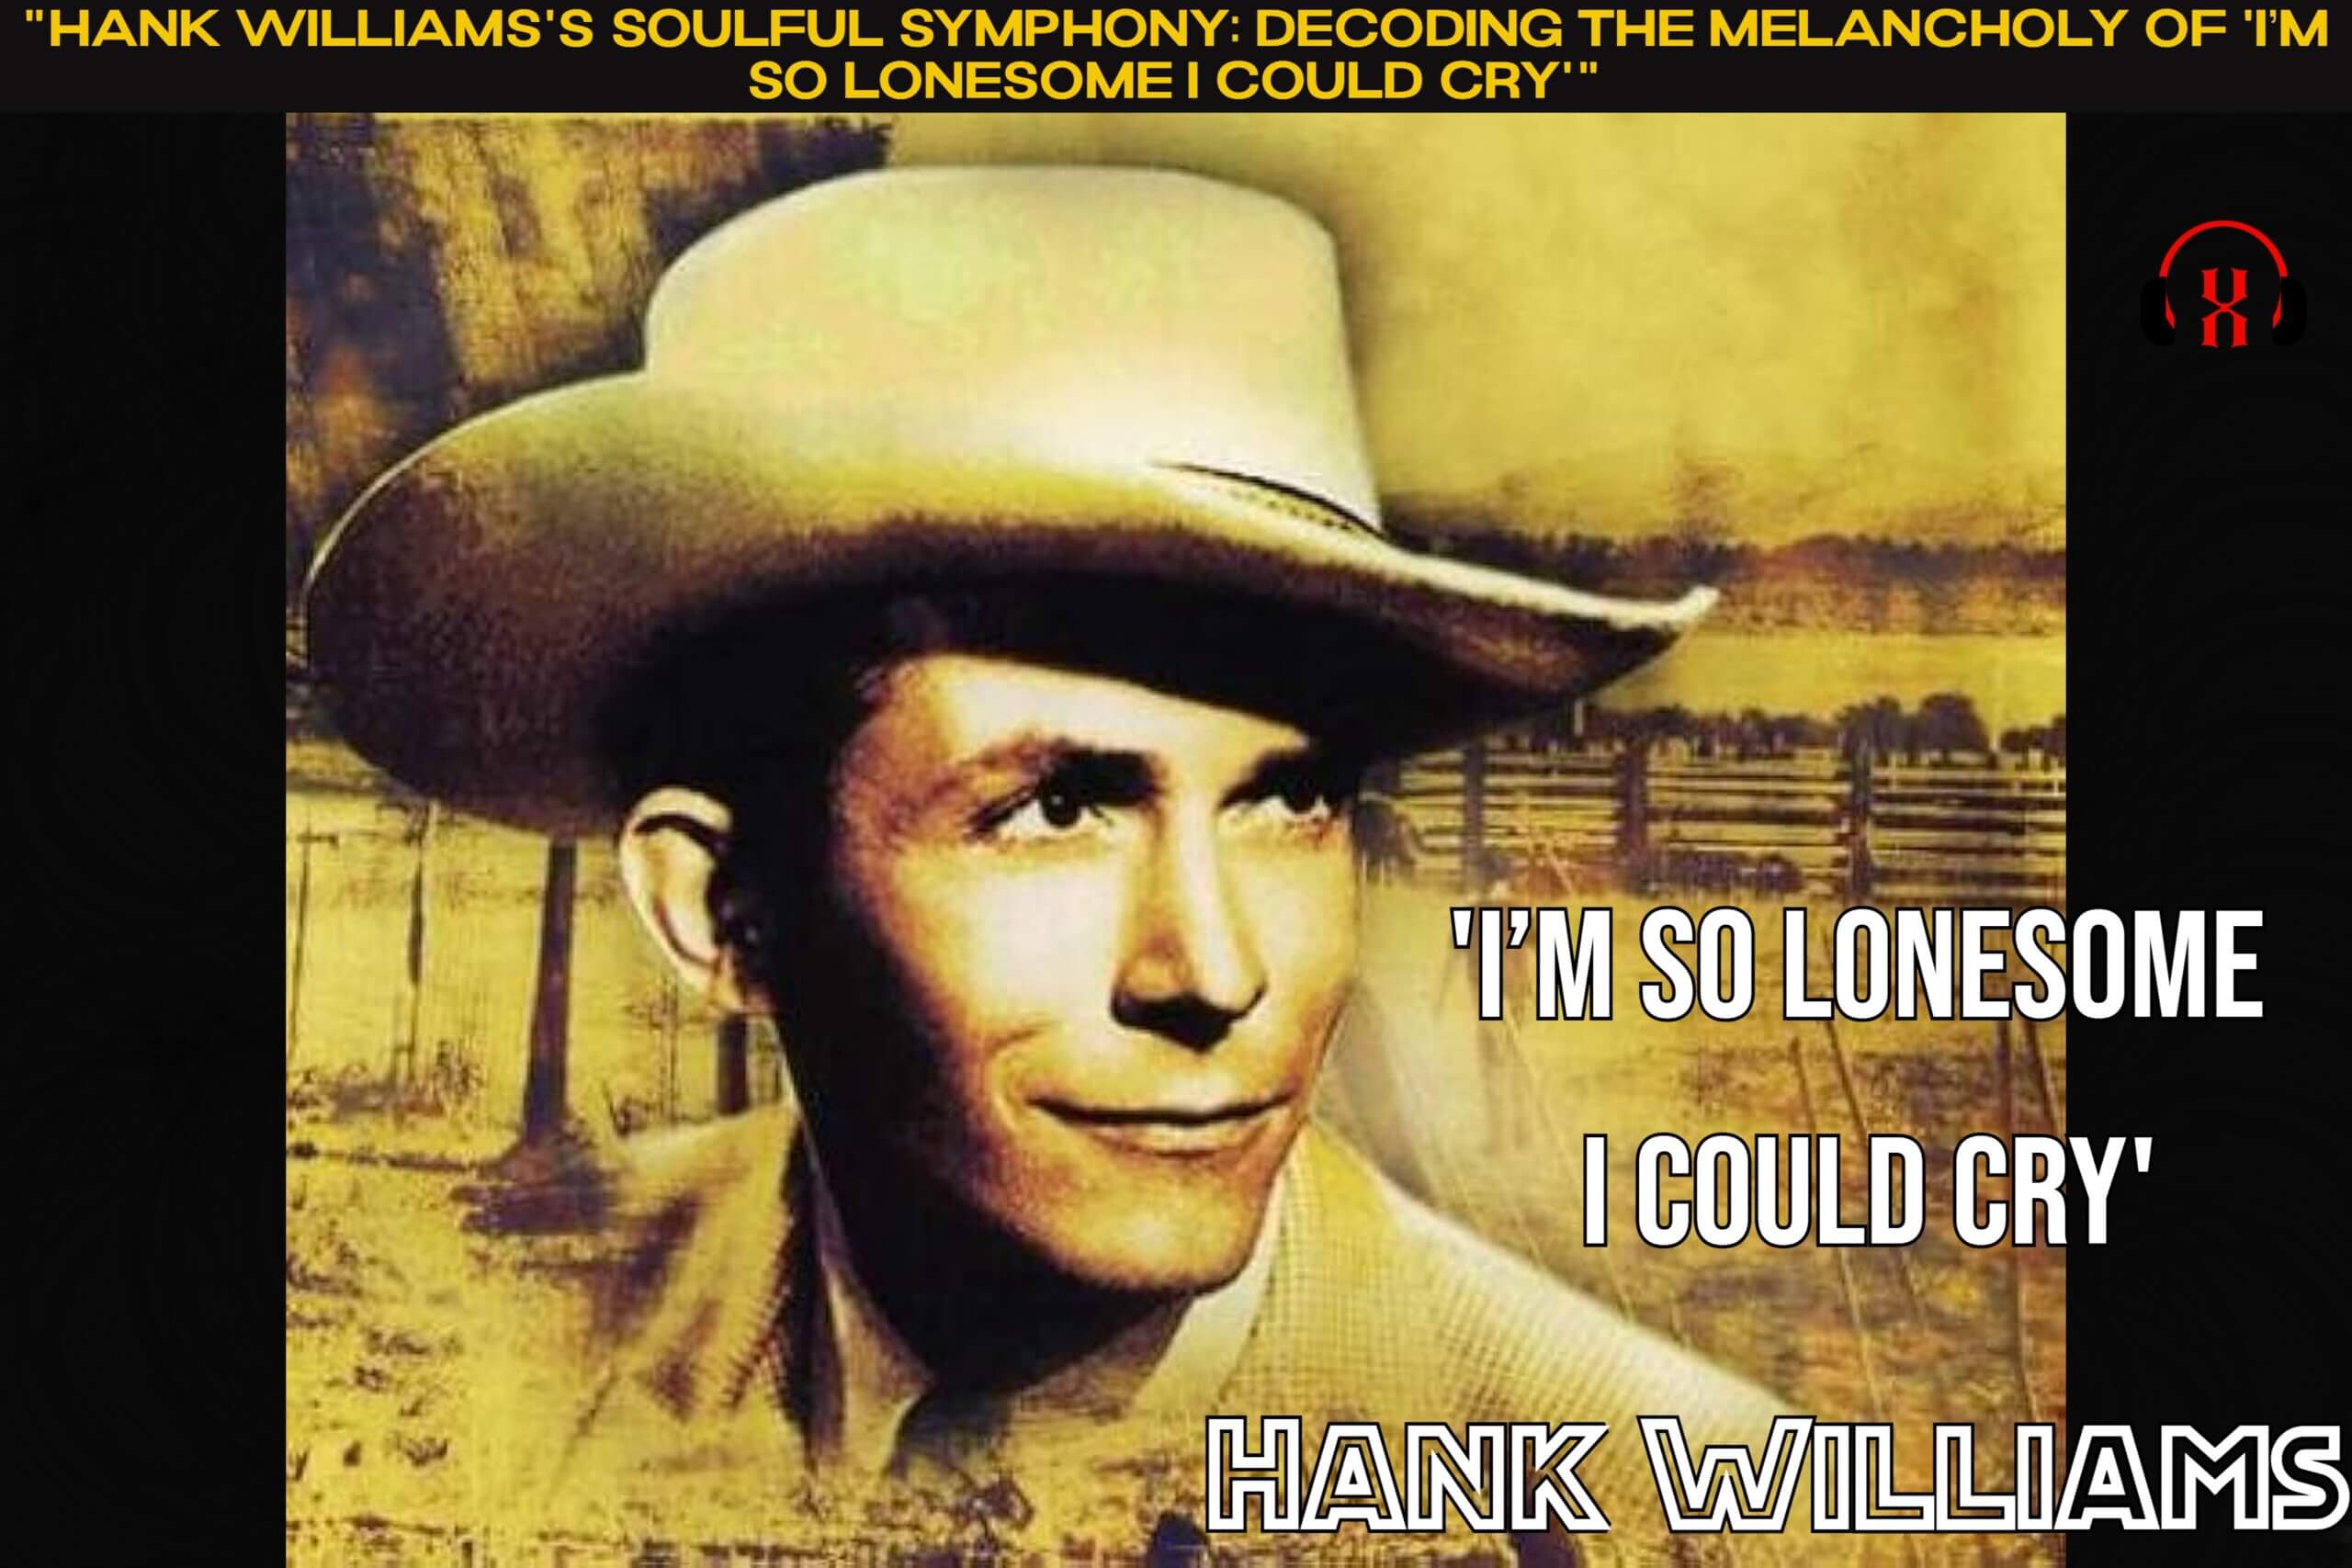 "Hank Williams's Soulful Symphony: Decoding the Melancholy of 'I’m So Lonesome I Could Cry'"